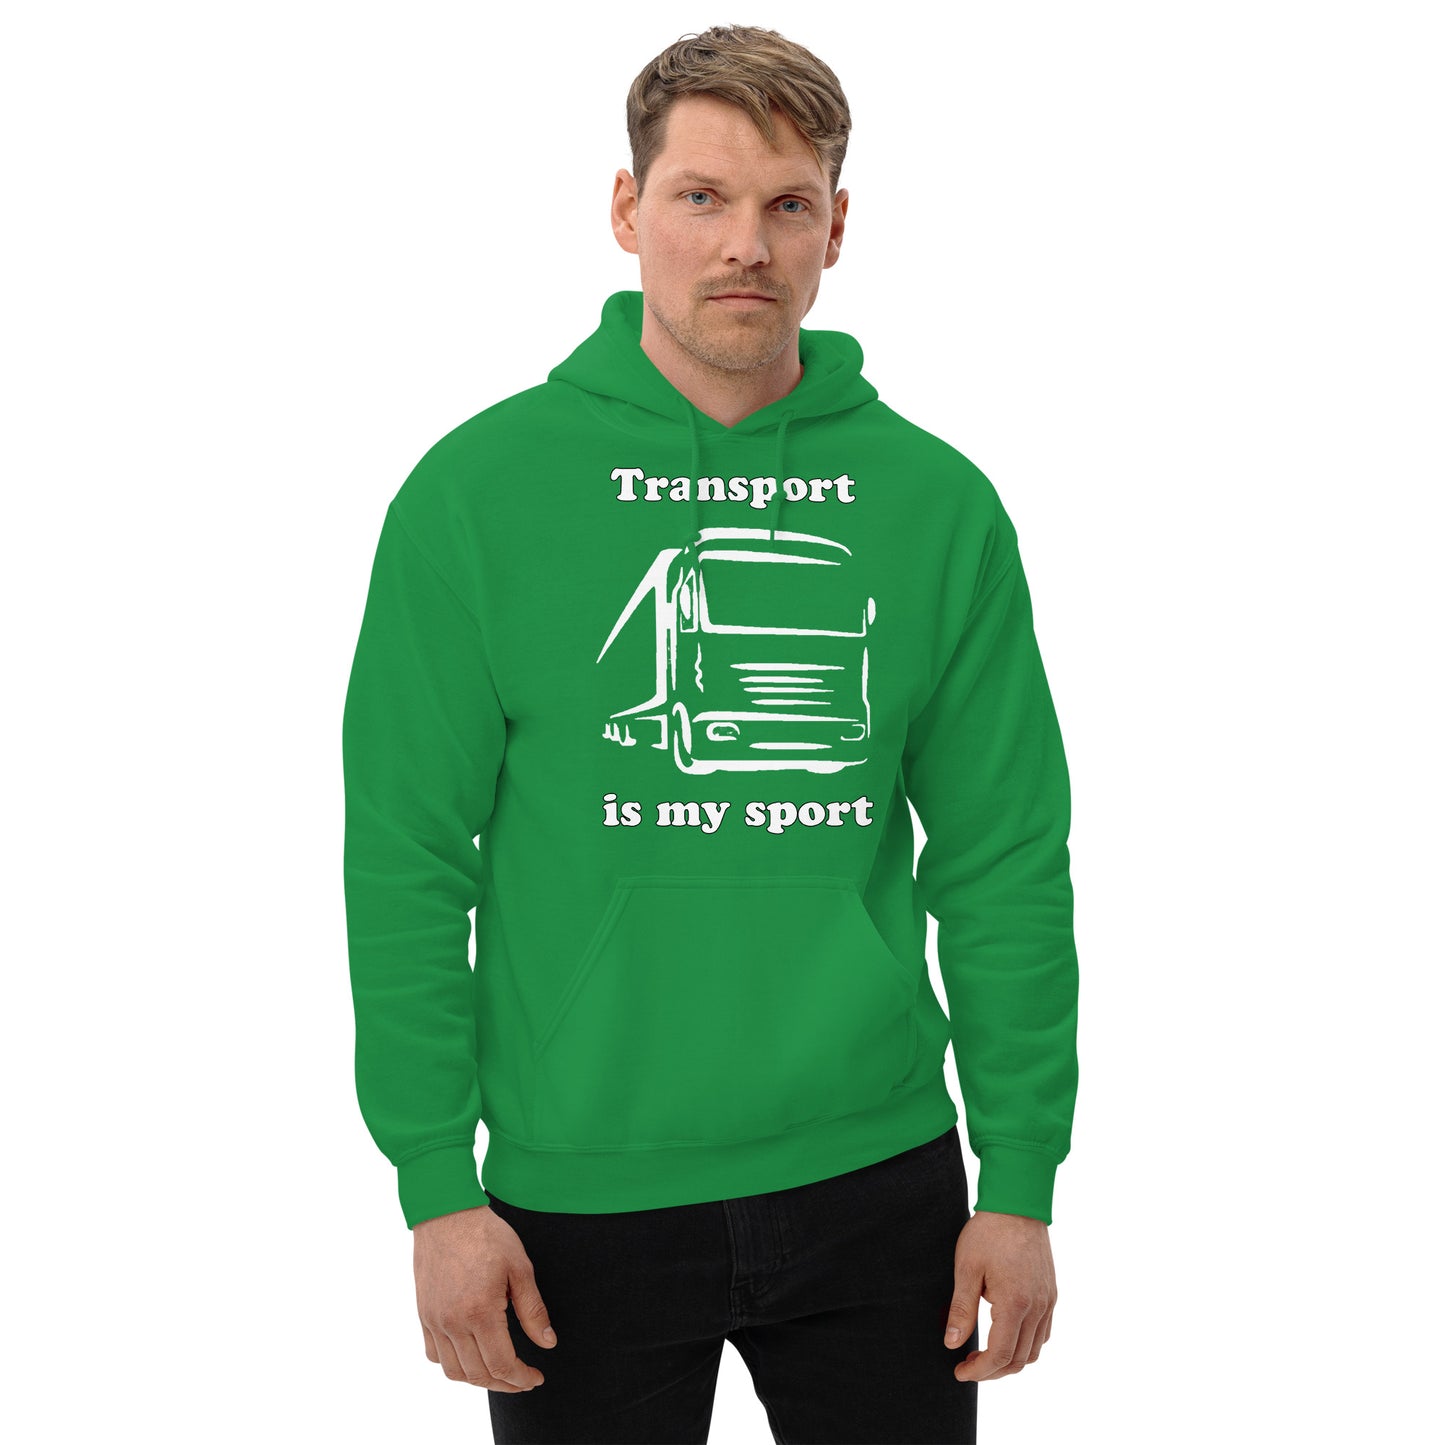 Man with Irish green hoodie with picture of truck and text "Transport is my sport"